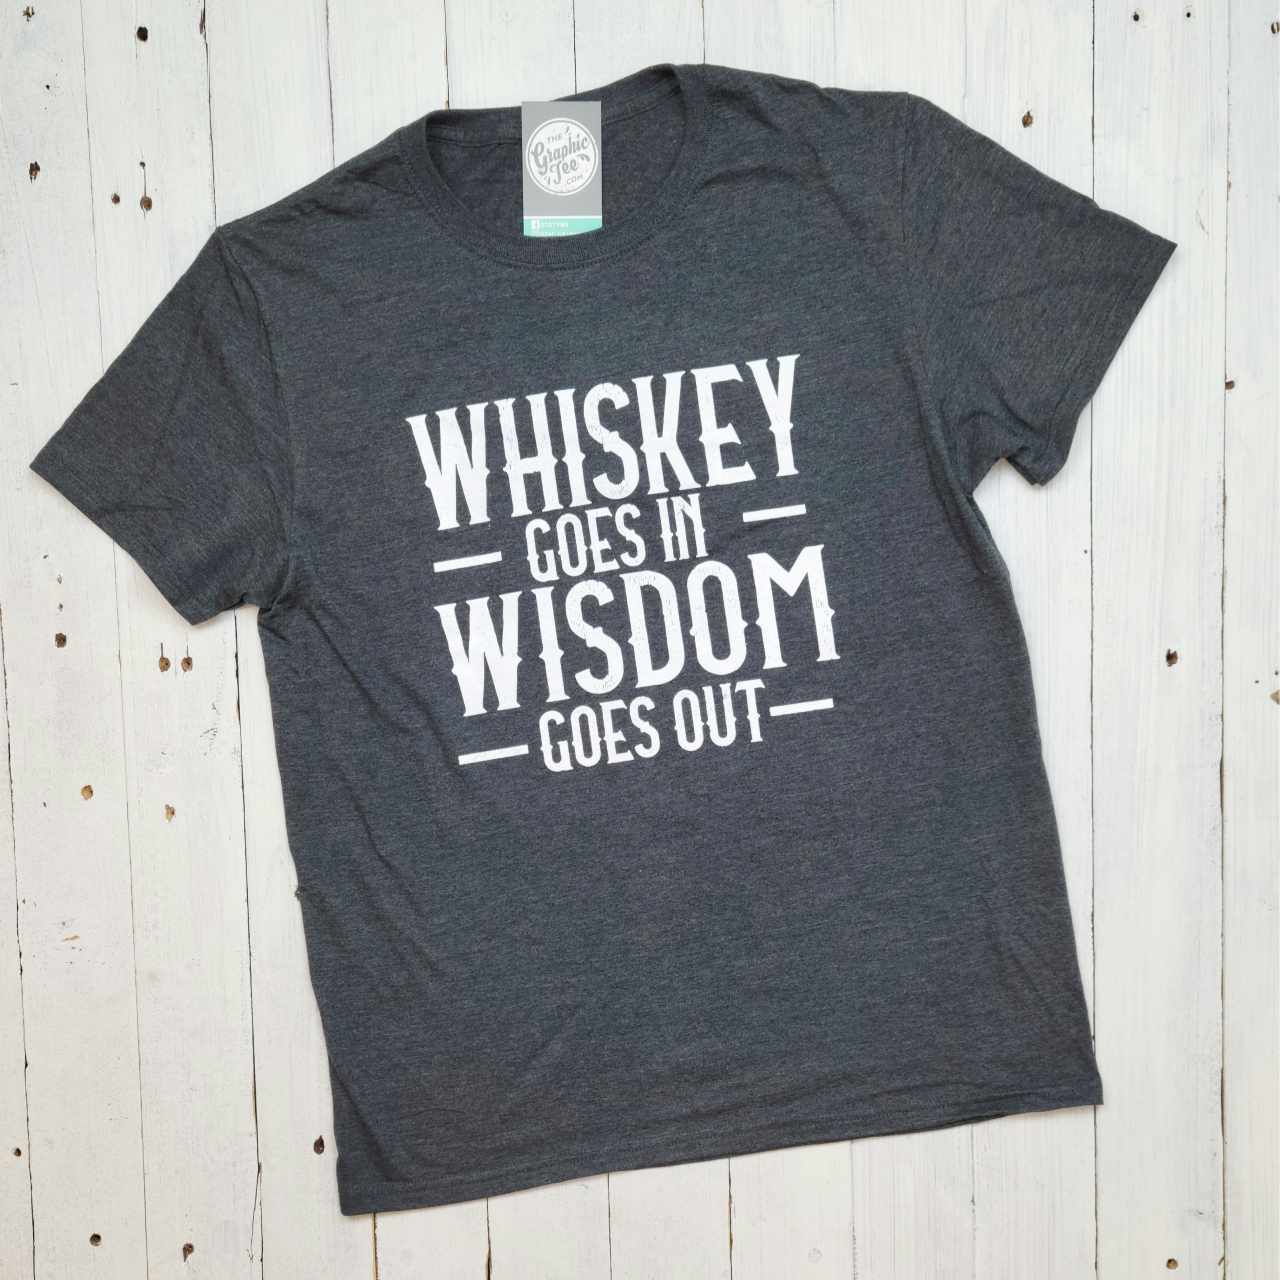 *WHOLESALE* Whiskey Goes In Wisdom Goes Out - Adult Tee - The Graphic Tee